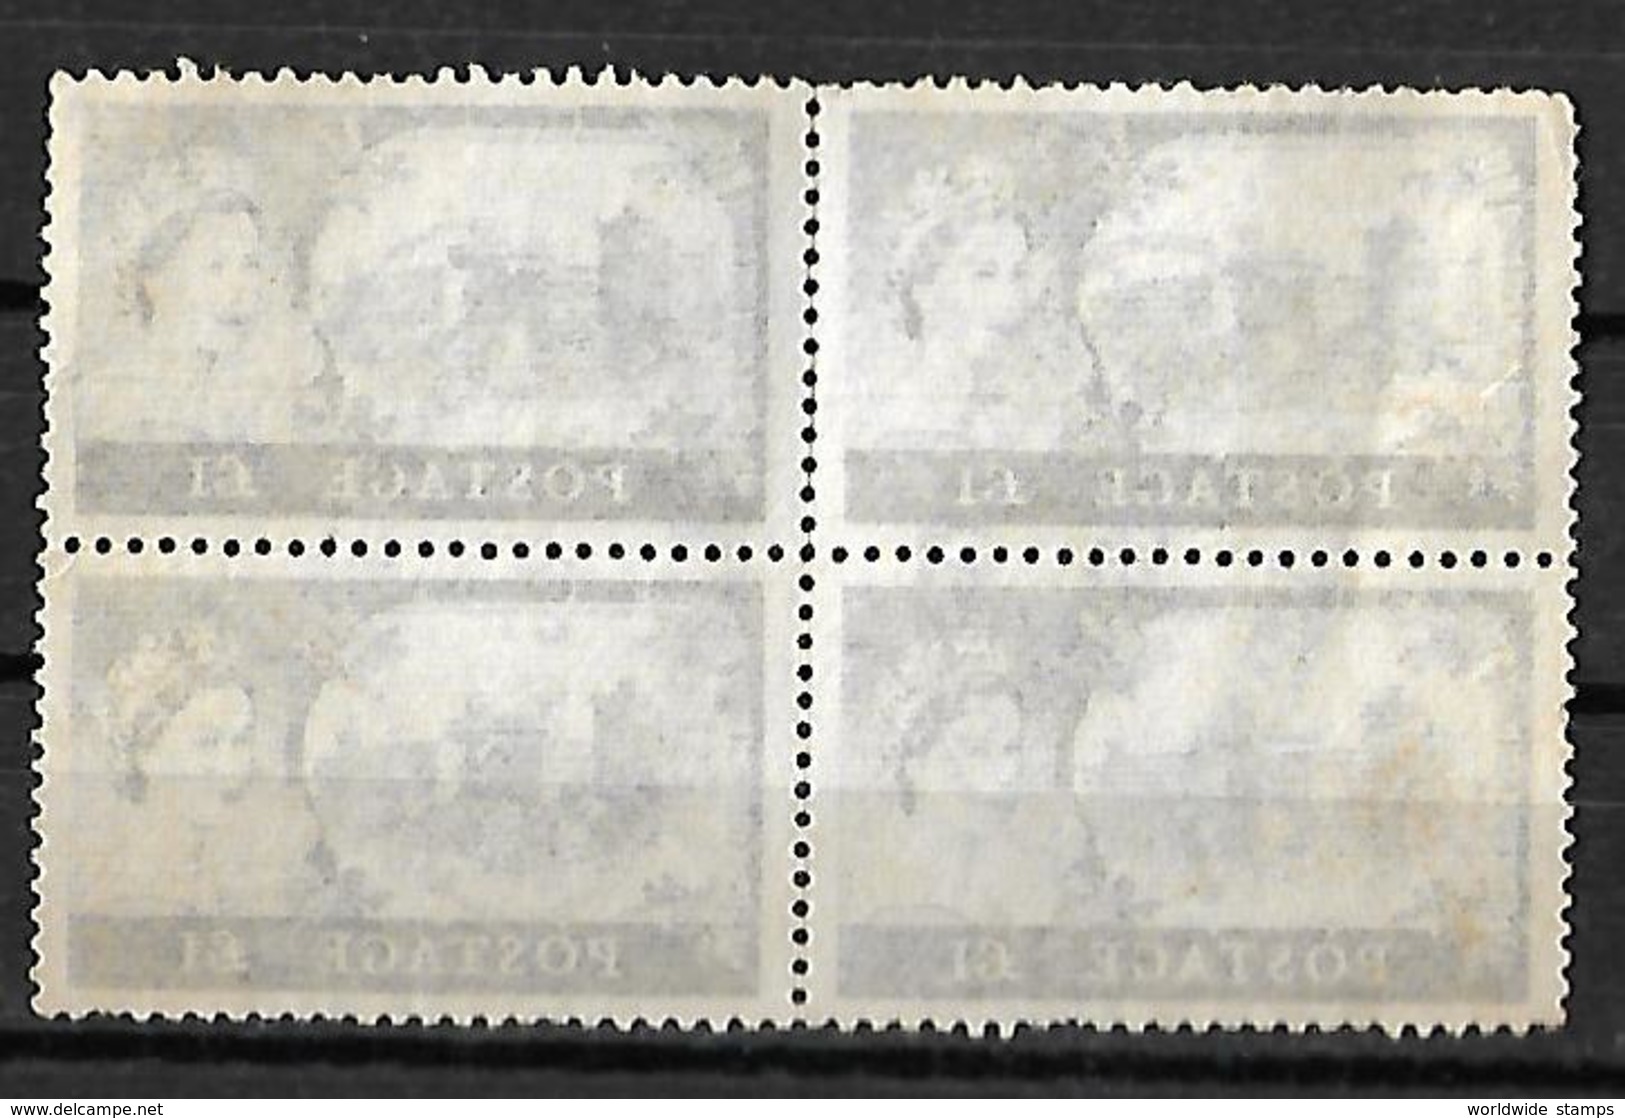 Great Britain 1959 £1 Wilding Castle  Block Of 4 England  High Value Used Stamps - Neufs